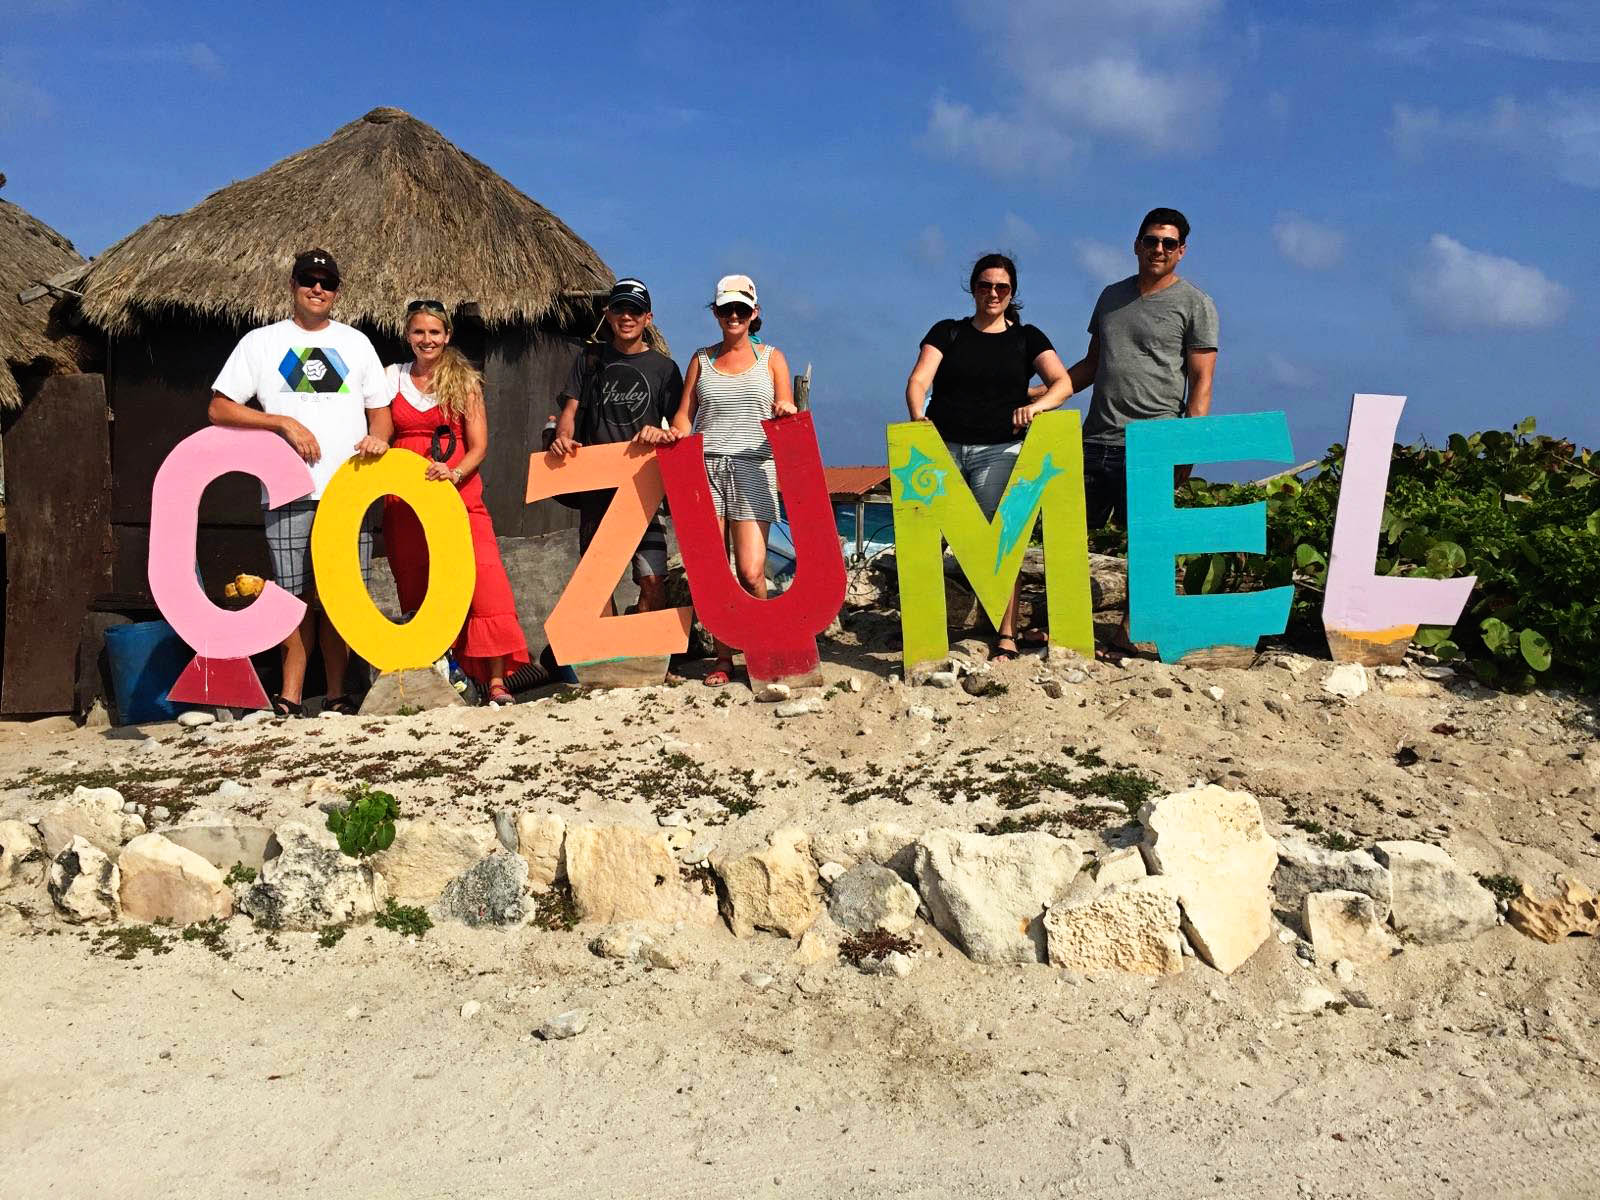 8 unforgettable things to do at Cozumel Mexico | Day trip on Cozumel #cozumel #mexico #simplywander